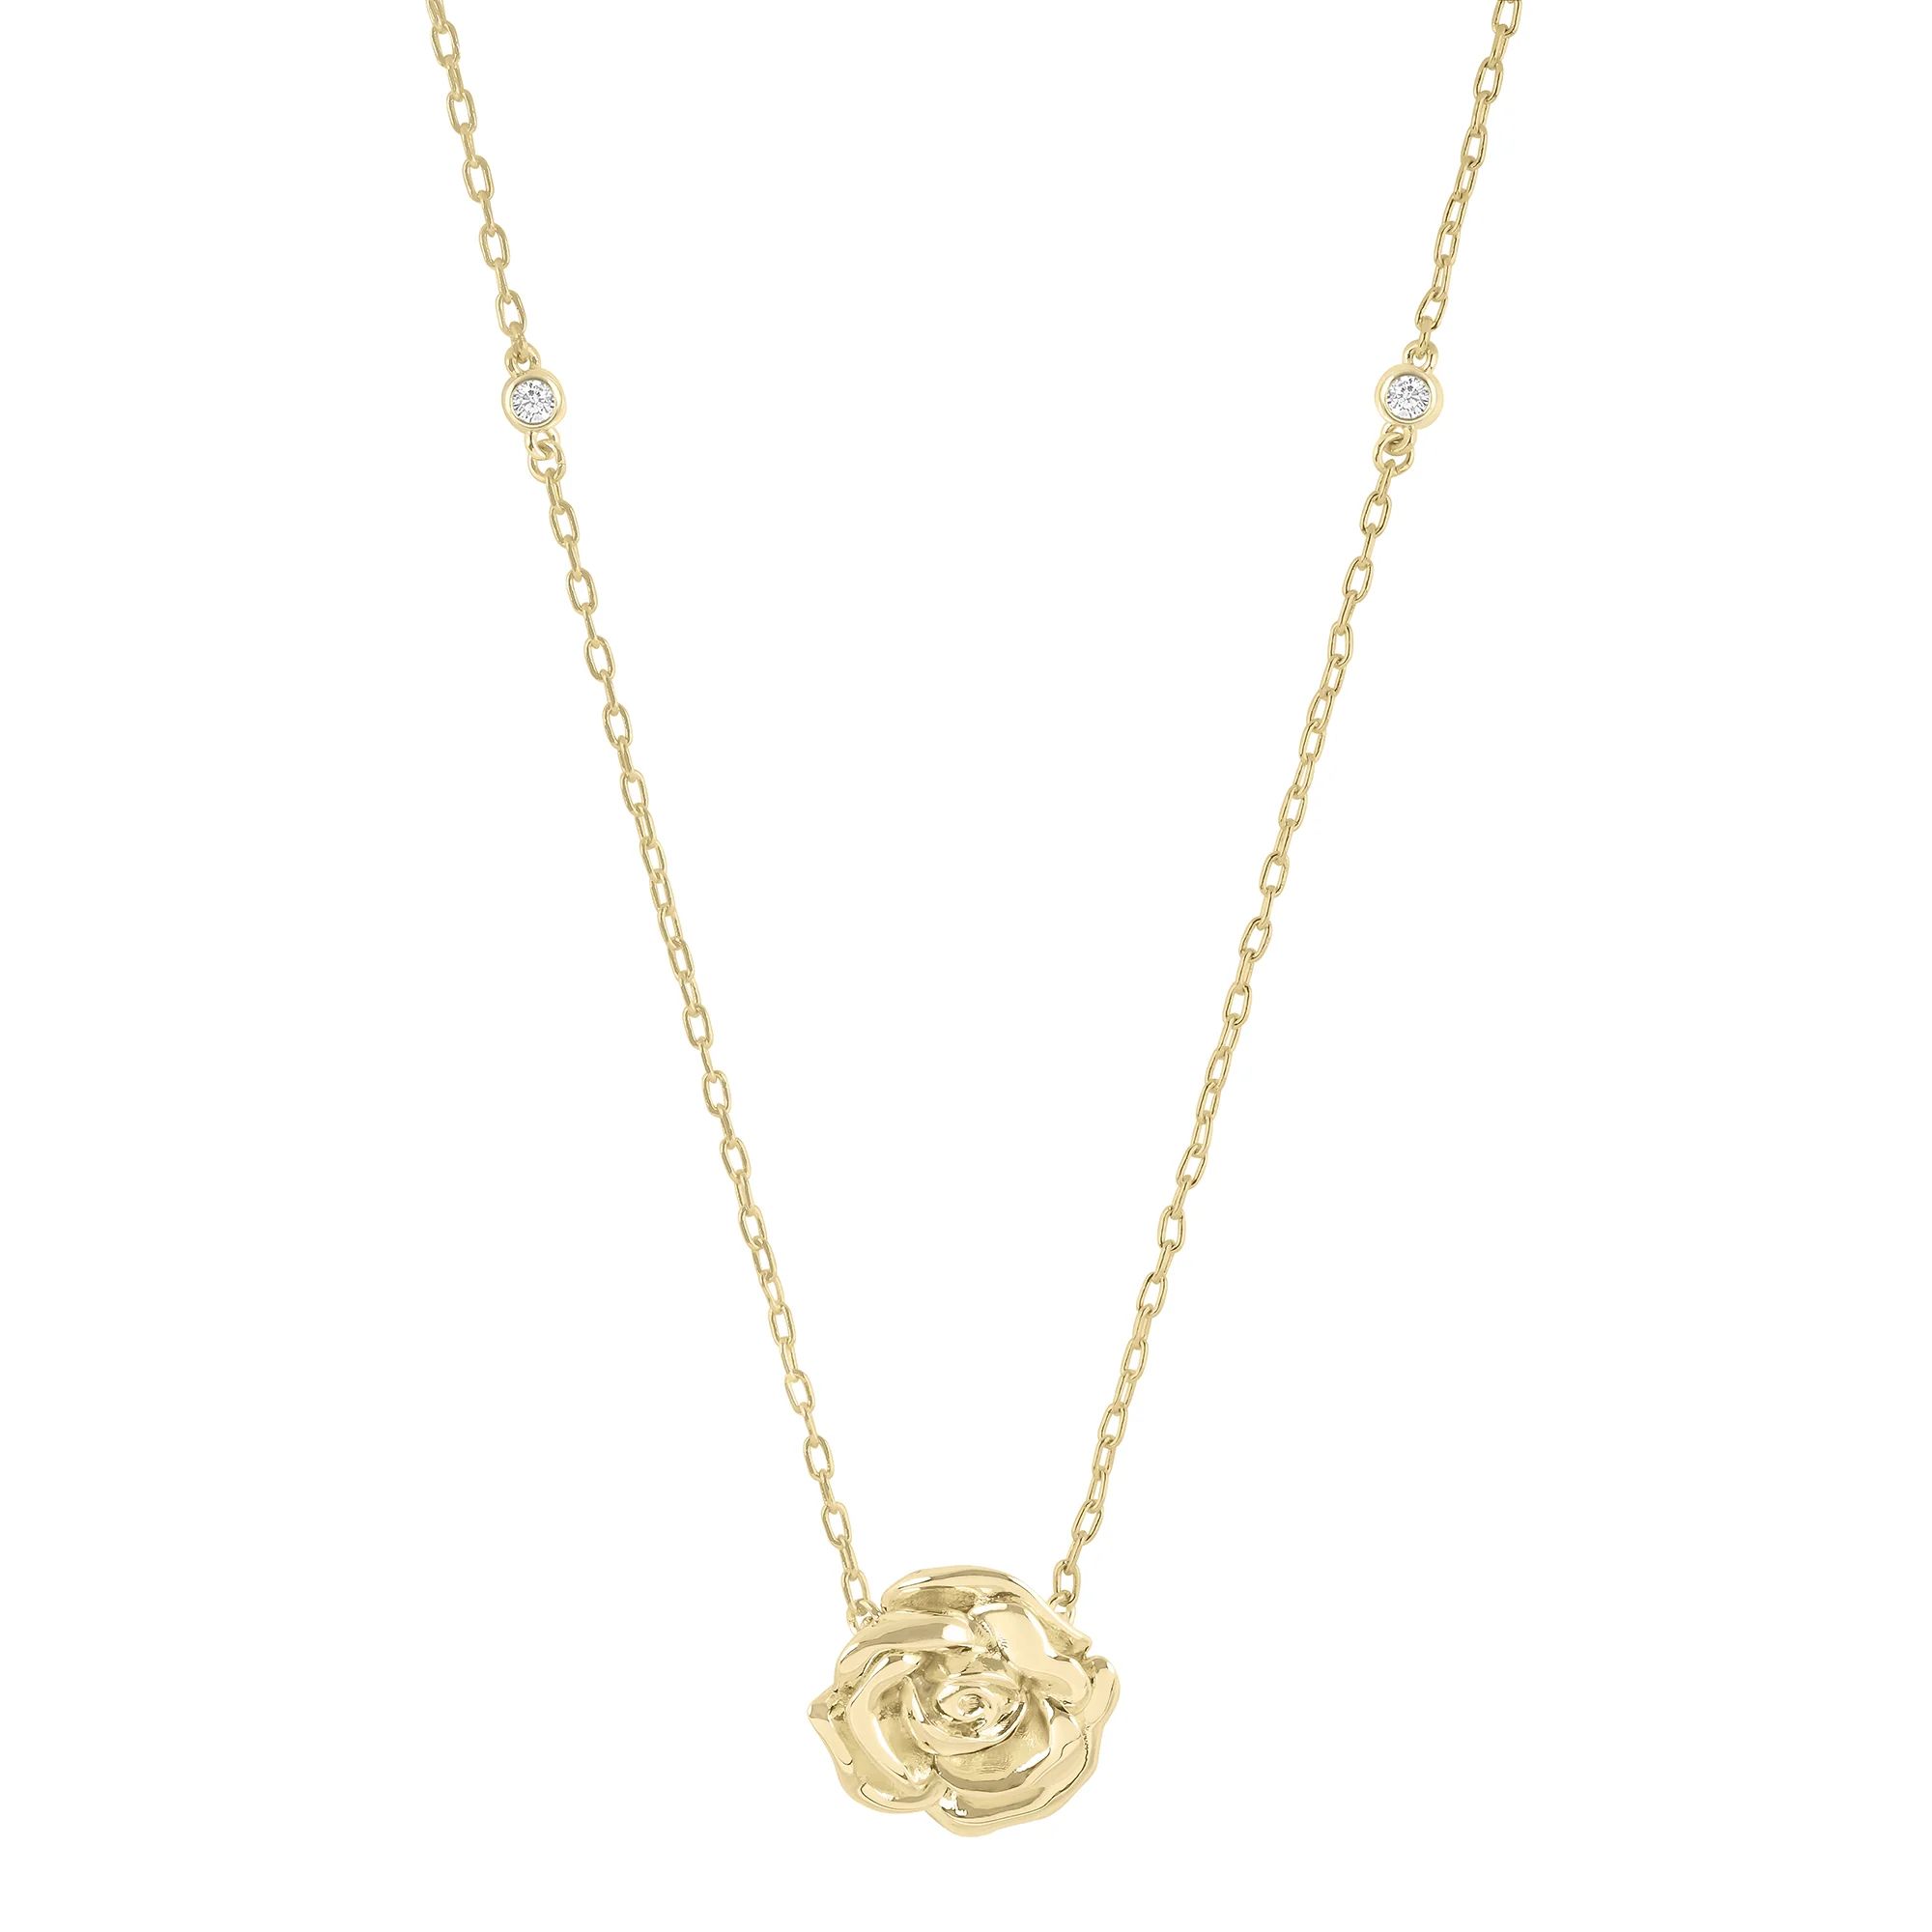 Smell the Rosies Necklace | Electric Picks Jewelry